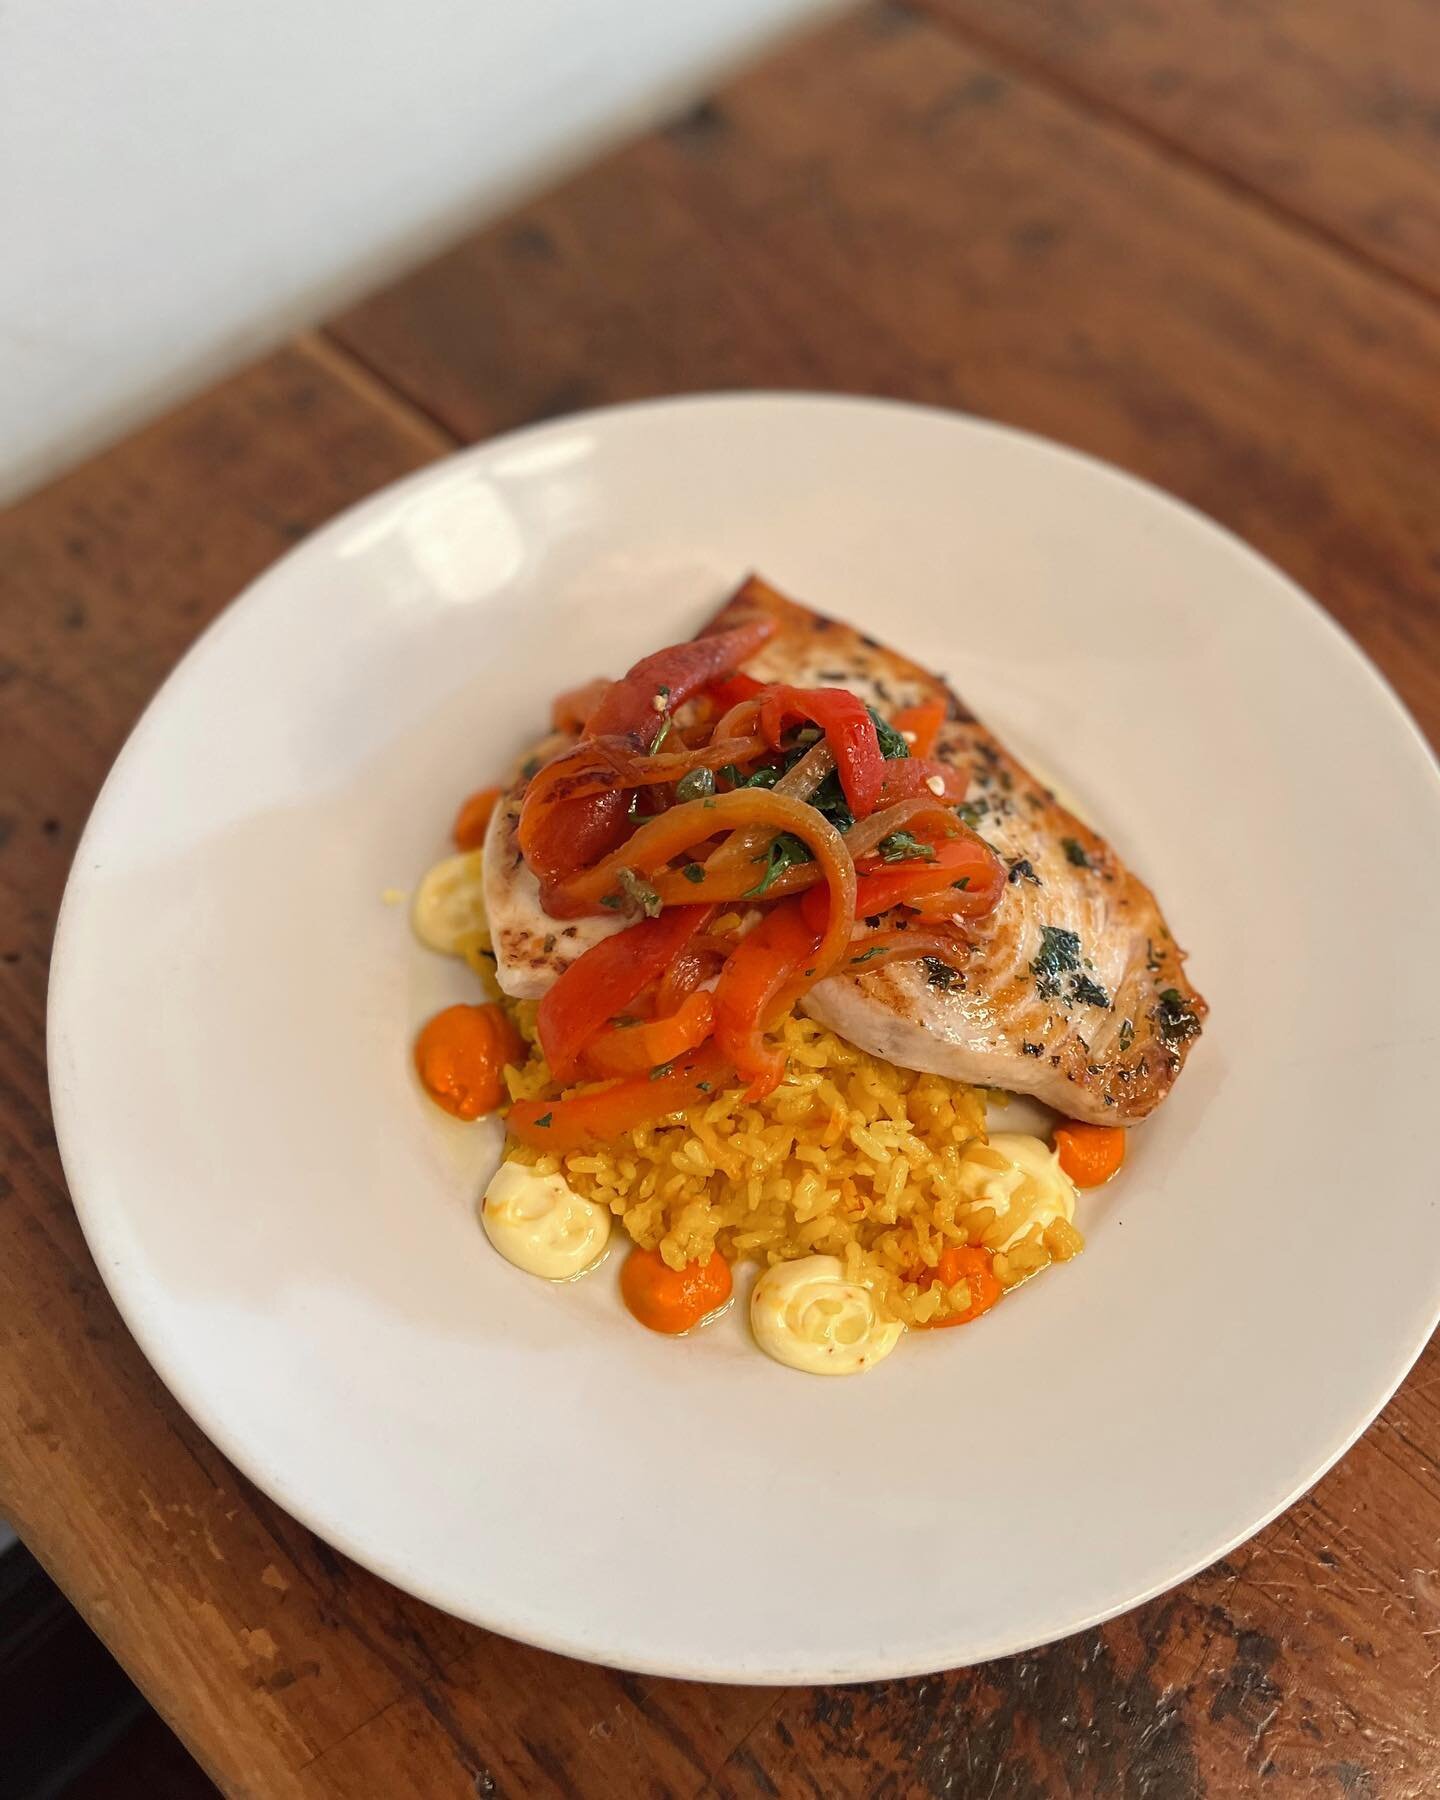 Such a beautiful dish ✨
New to our menu - Swordfish served with @ansonmills carolina rice, roasted pepper salad, romesco, and saffron aioli 

Come try one for yourself this weekend, it&rsquo;s delicious! 

#slc #slcfood #slcdining #visitutah #slcrest